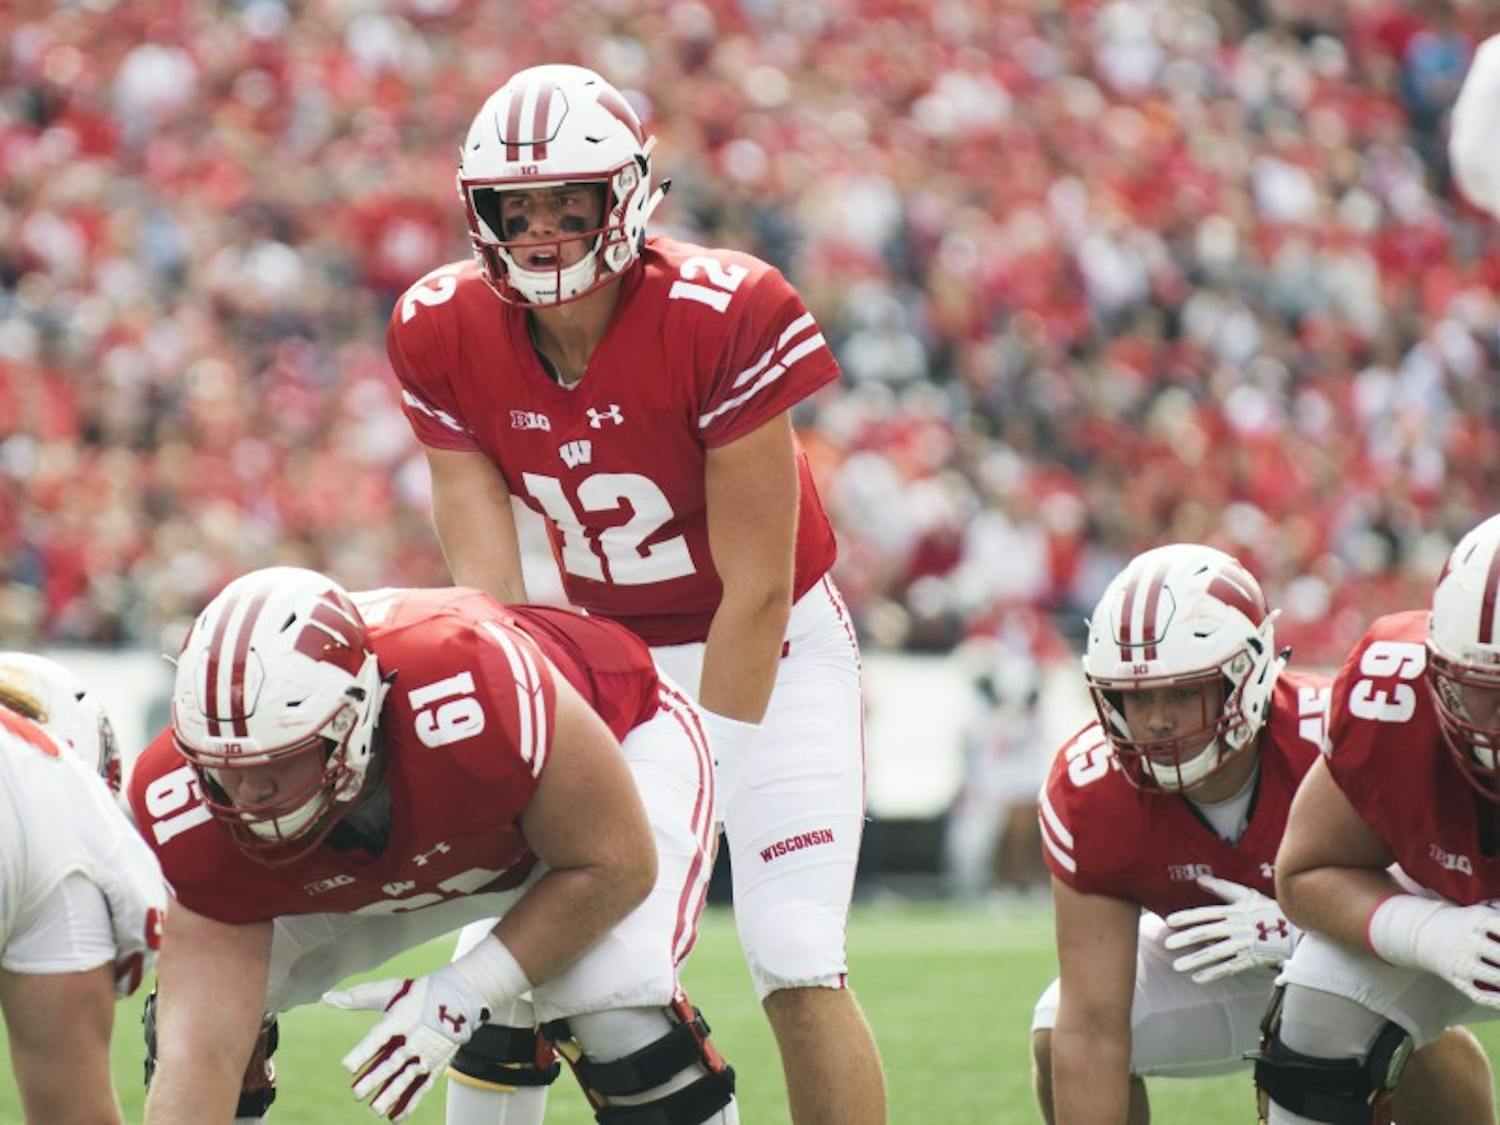 Quarterback Alex Hornibrook posted the best winning percentage in Wisconsin history in his 32 starts, but he won't return for his senior season.